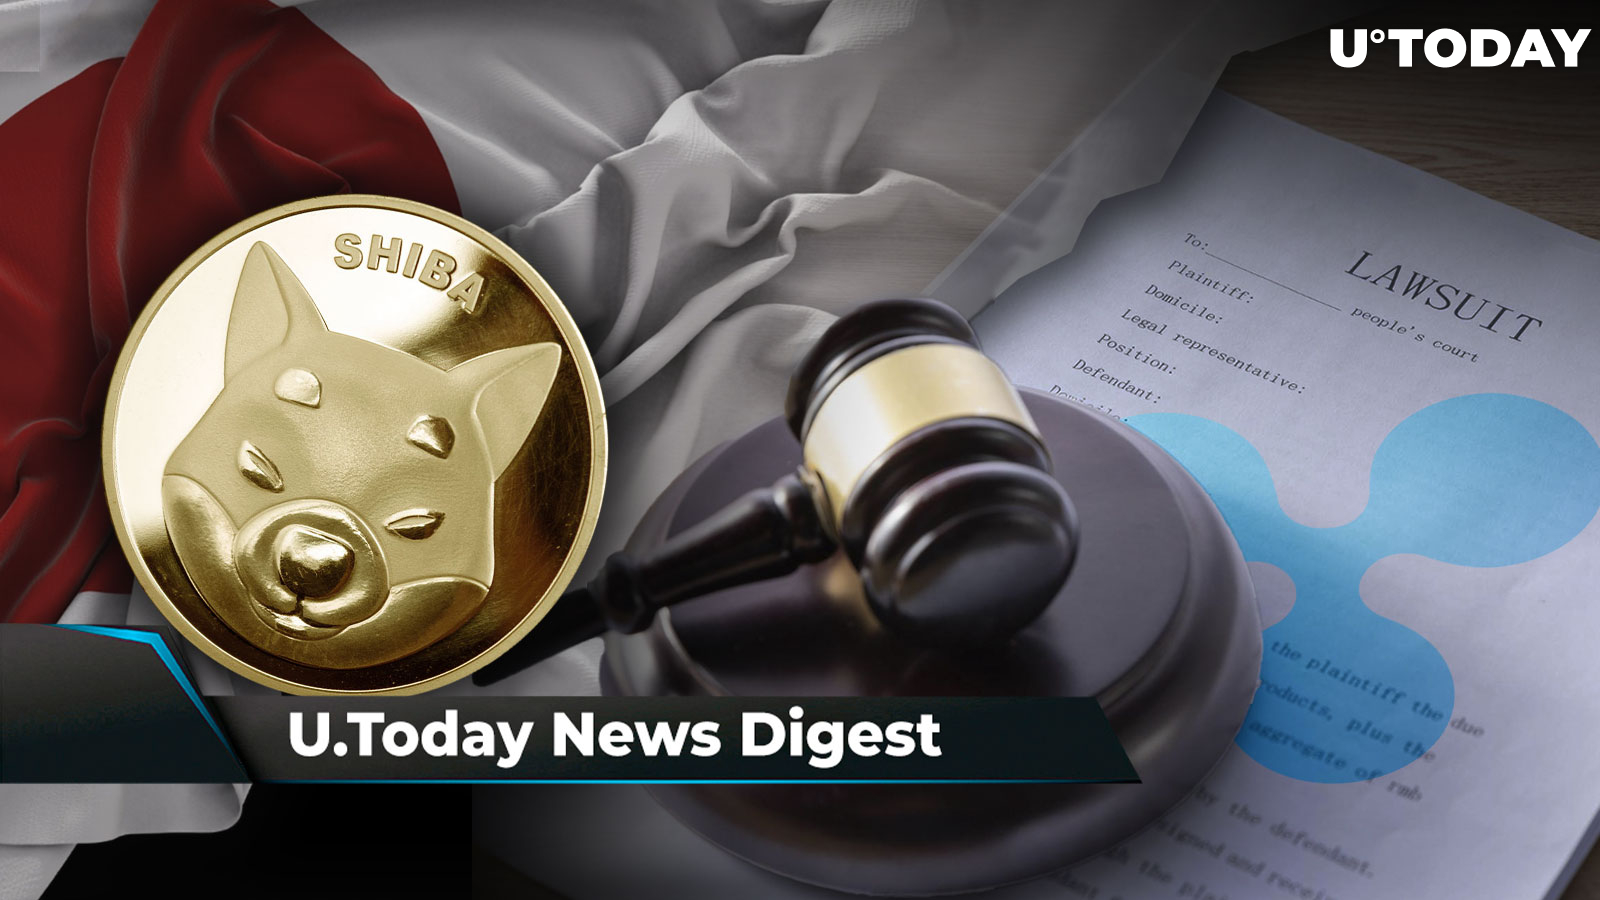 SHIB Perpetual Futures Listed on Kraken, Ripple Lawsuit Speculated to Settle in June, SHIB Lead Shytoshi Kusama Supposed to Be in Japan: Crypto News Digest by U.Today